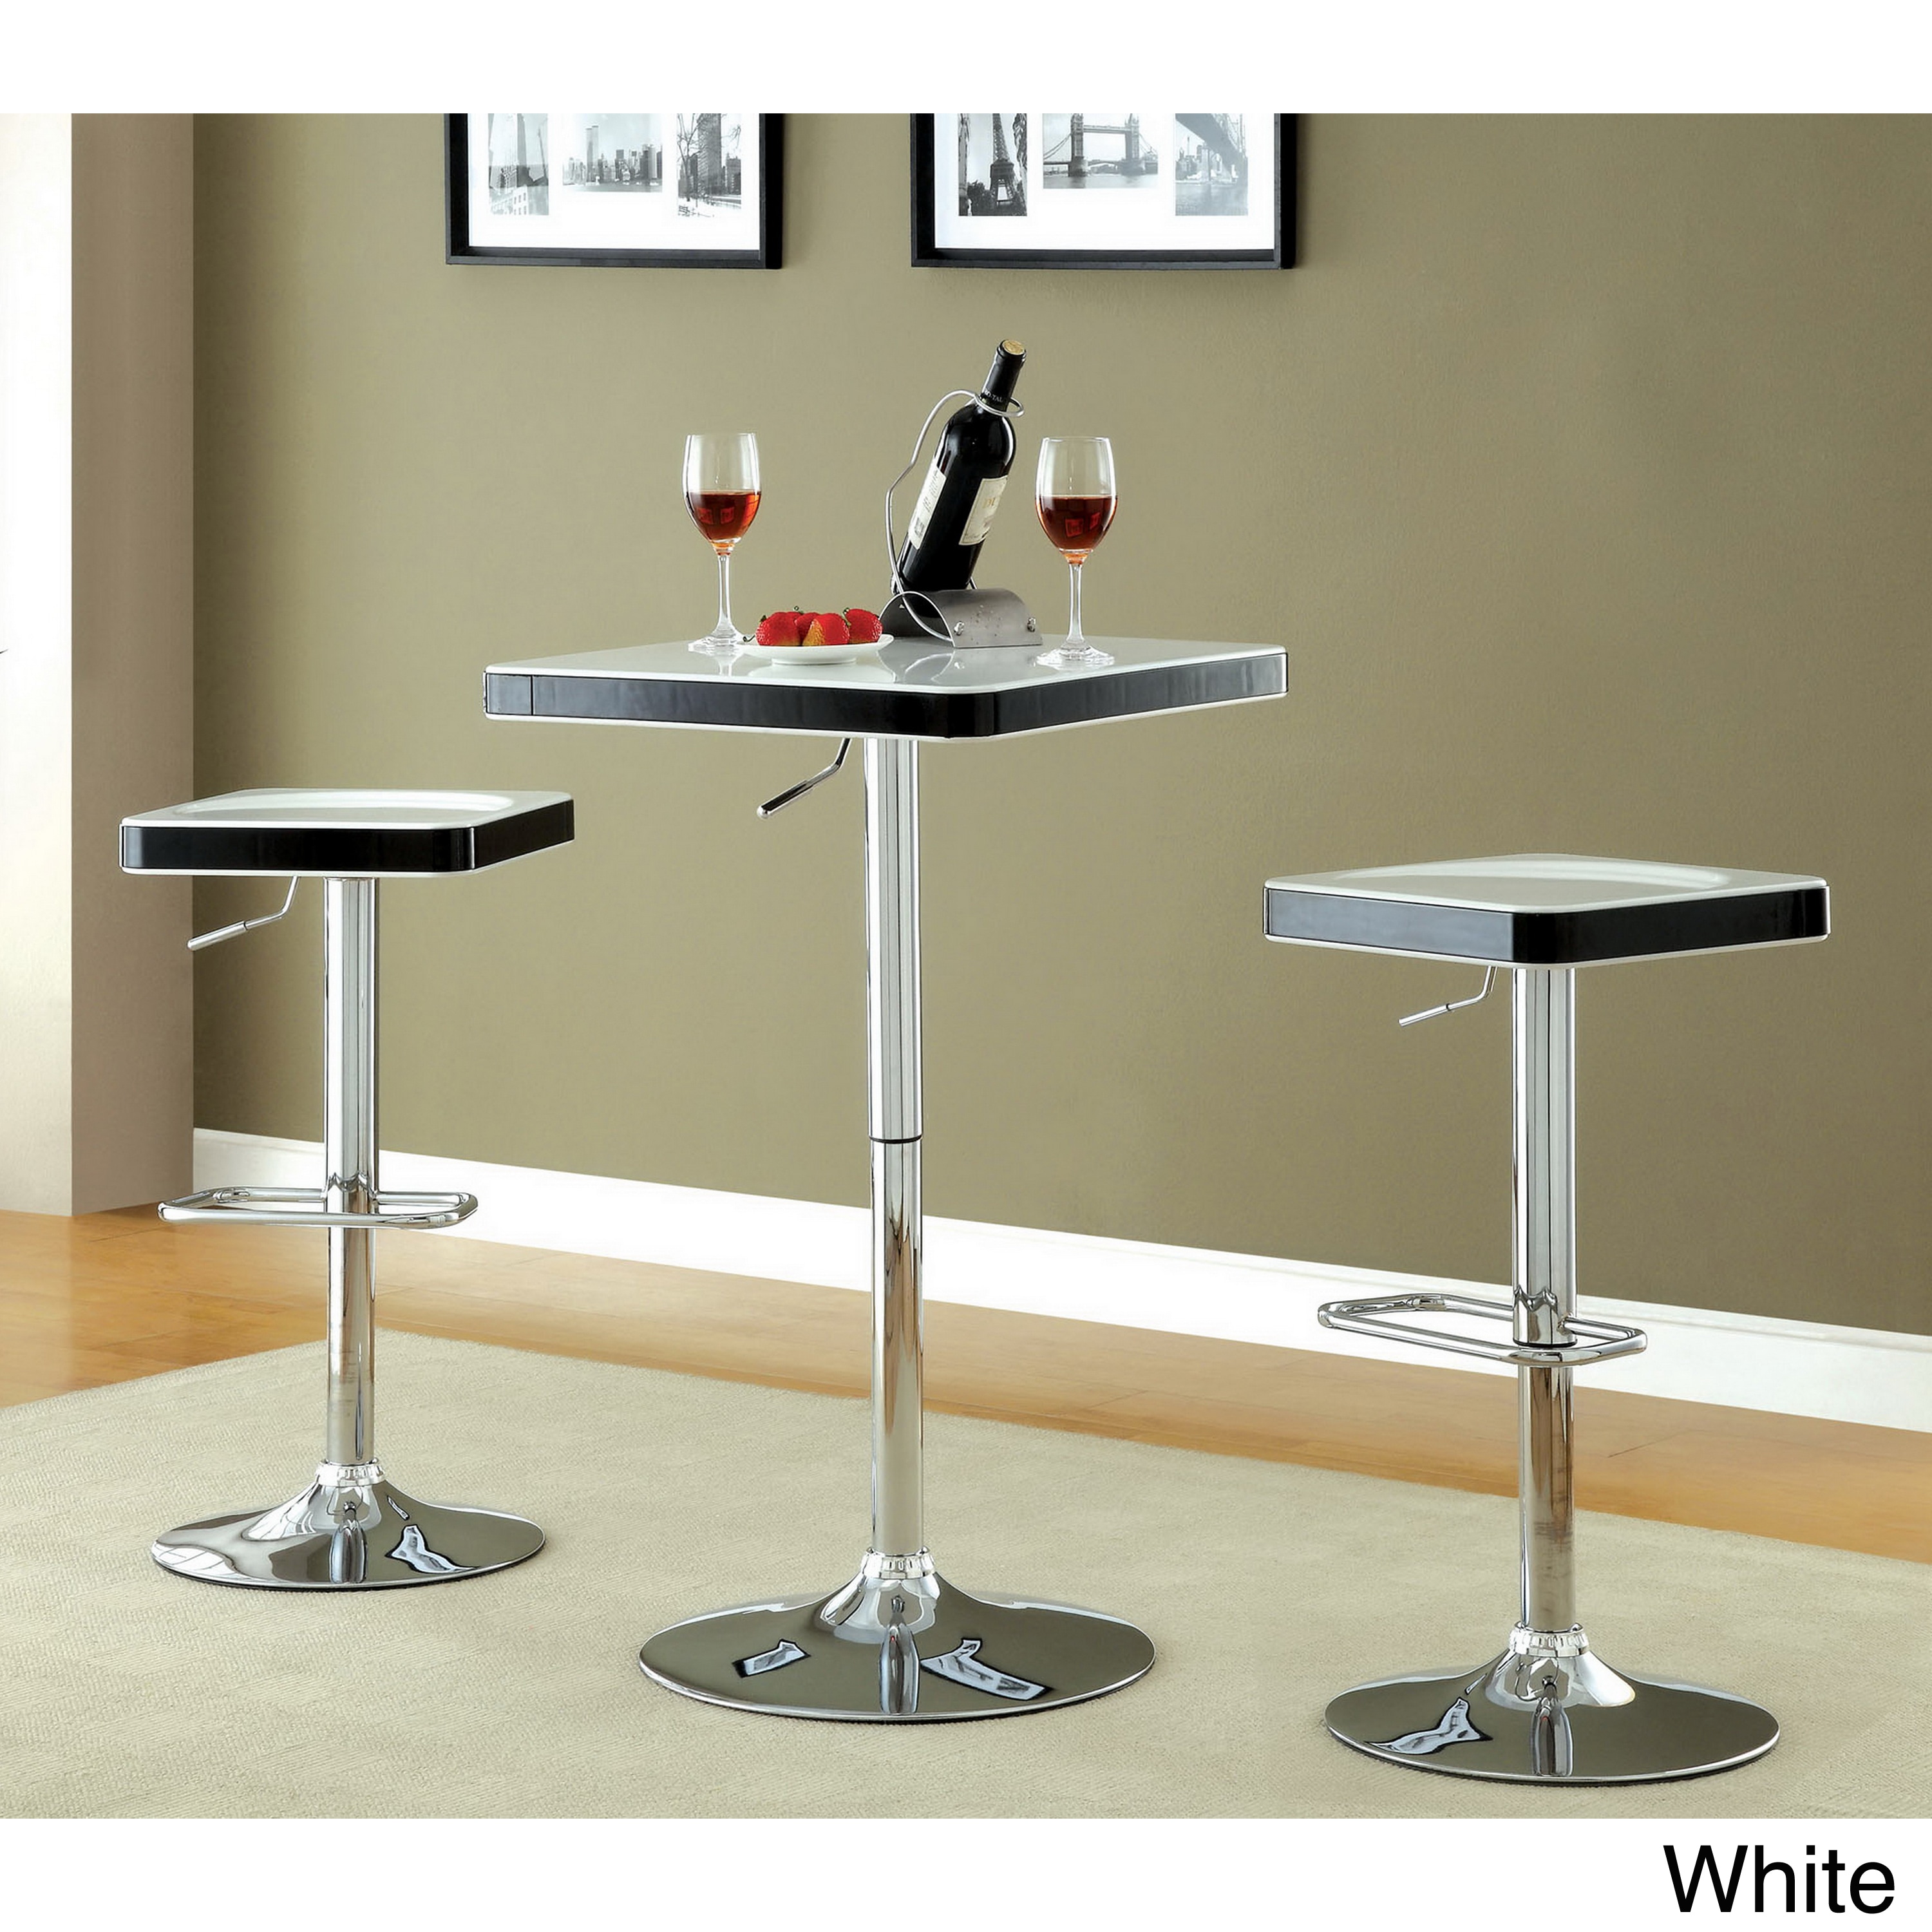 Swivel Bar Table Today $175.99 Sale $158.39 Save 10%